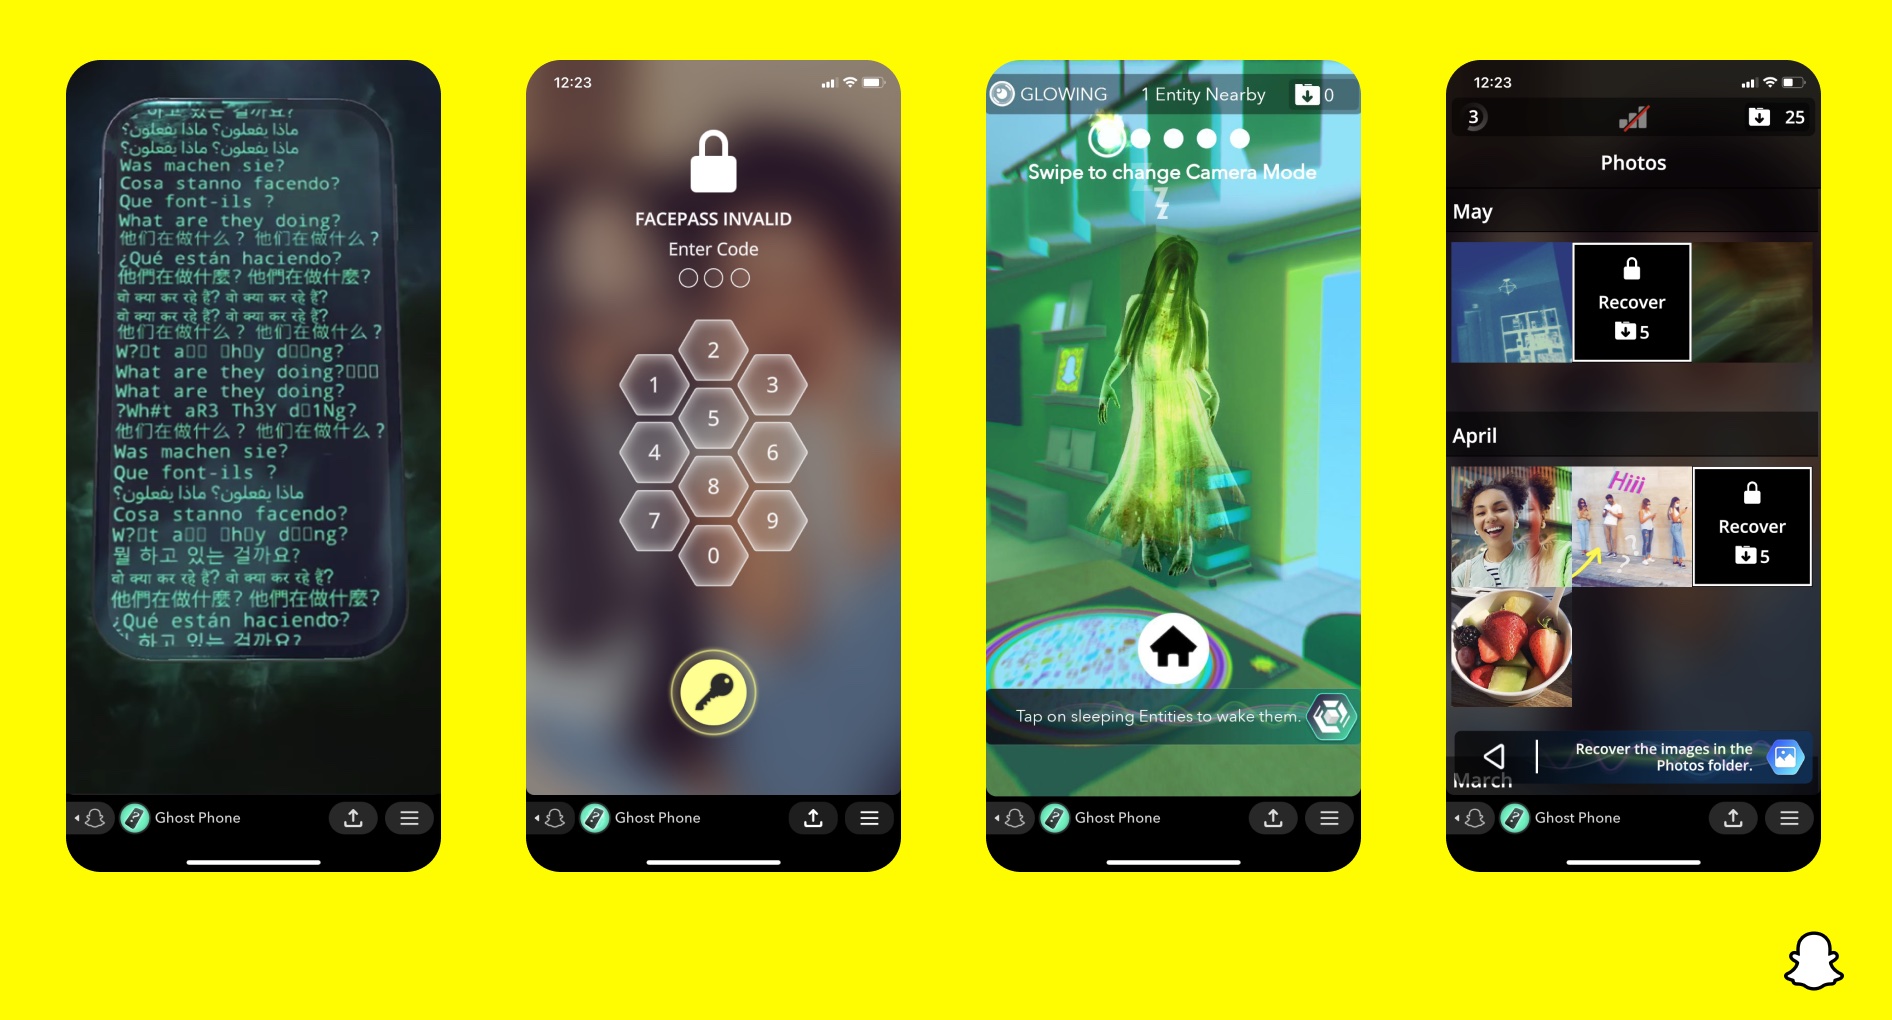 Snapchat Introduces First of its Kind AR Game: Ghost Phone